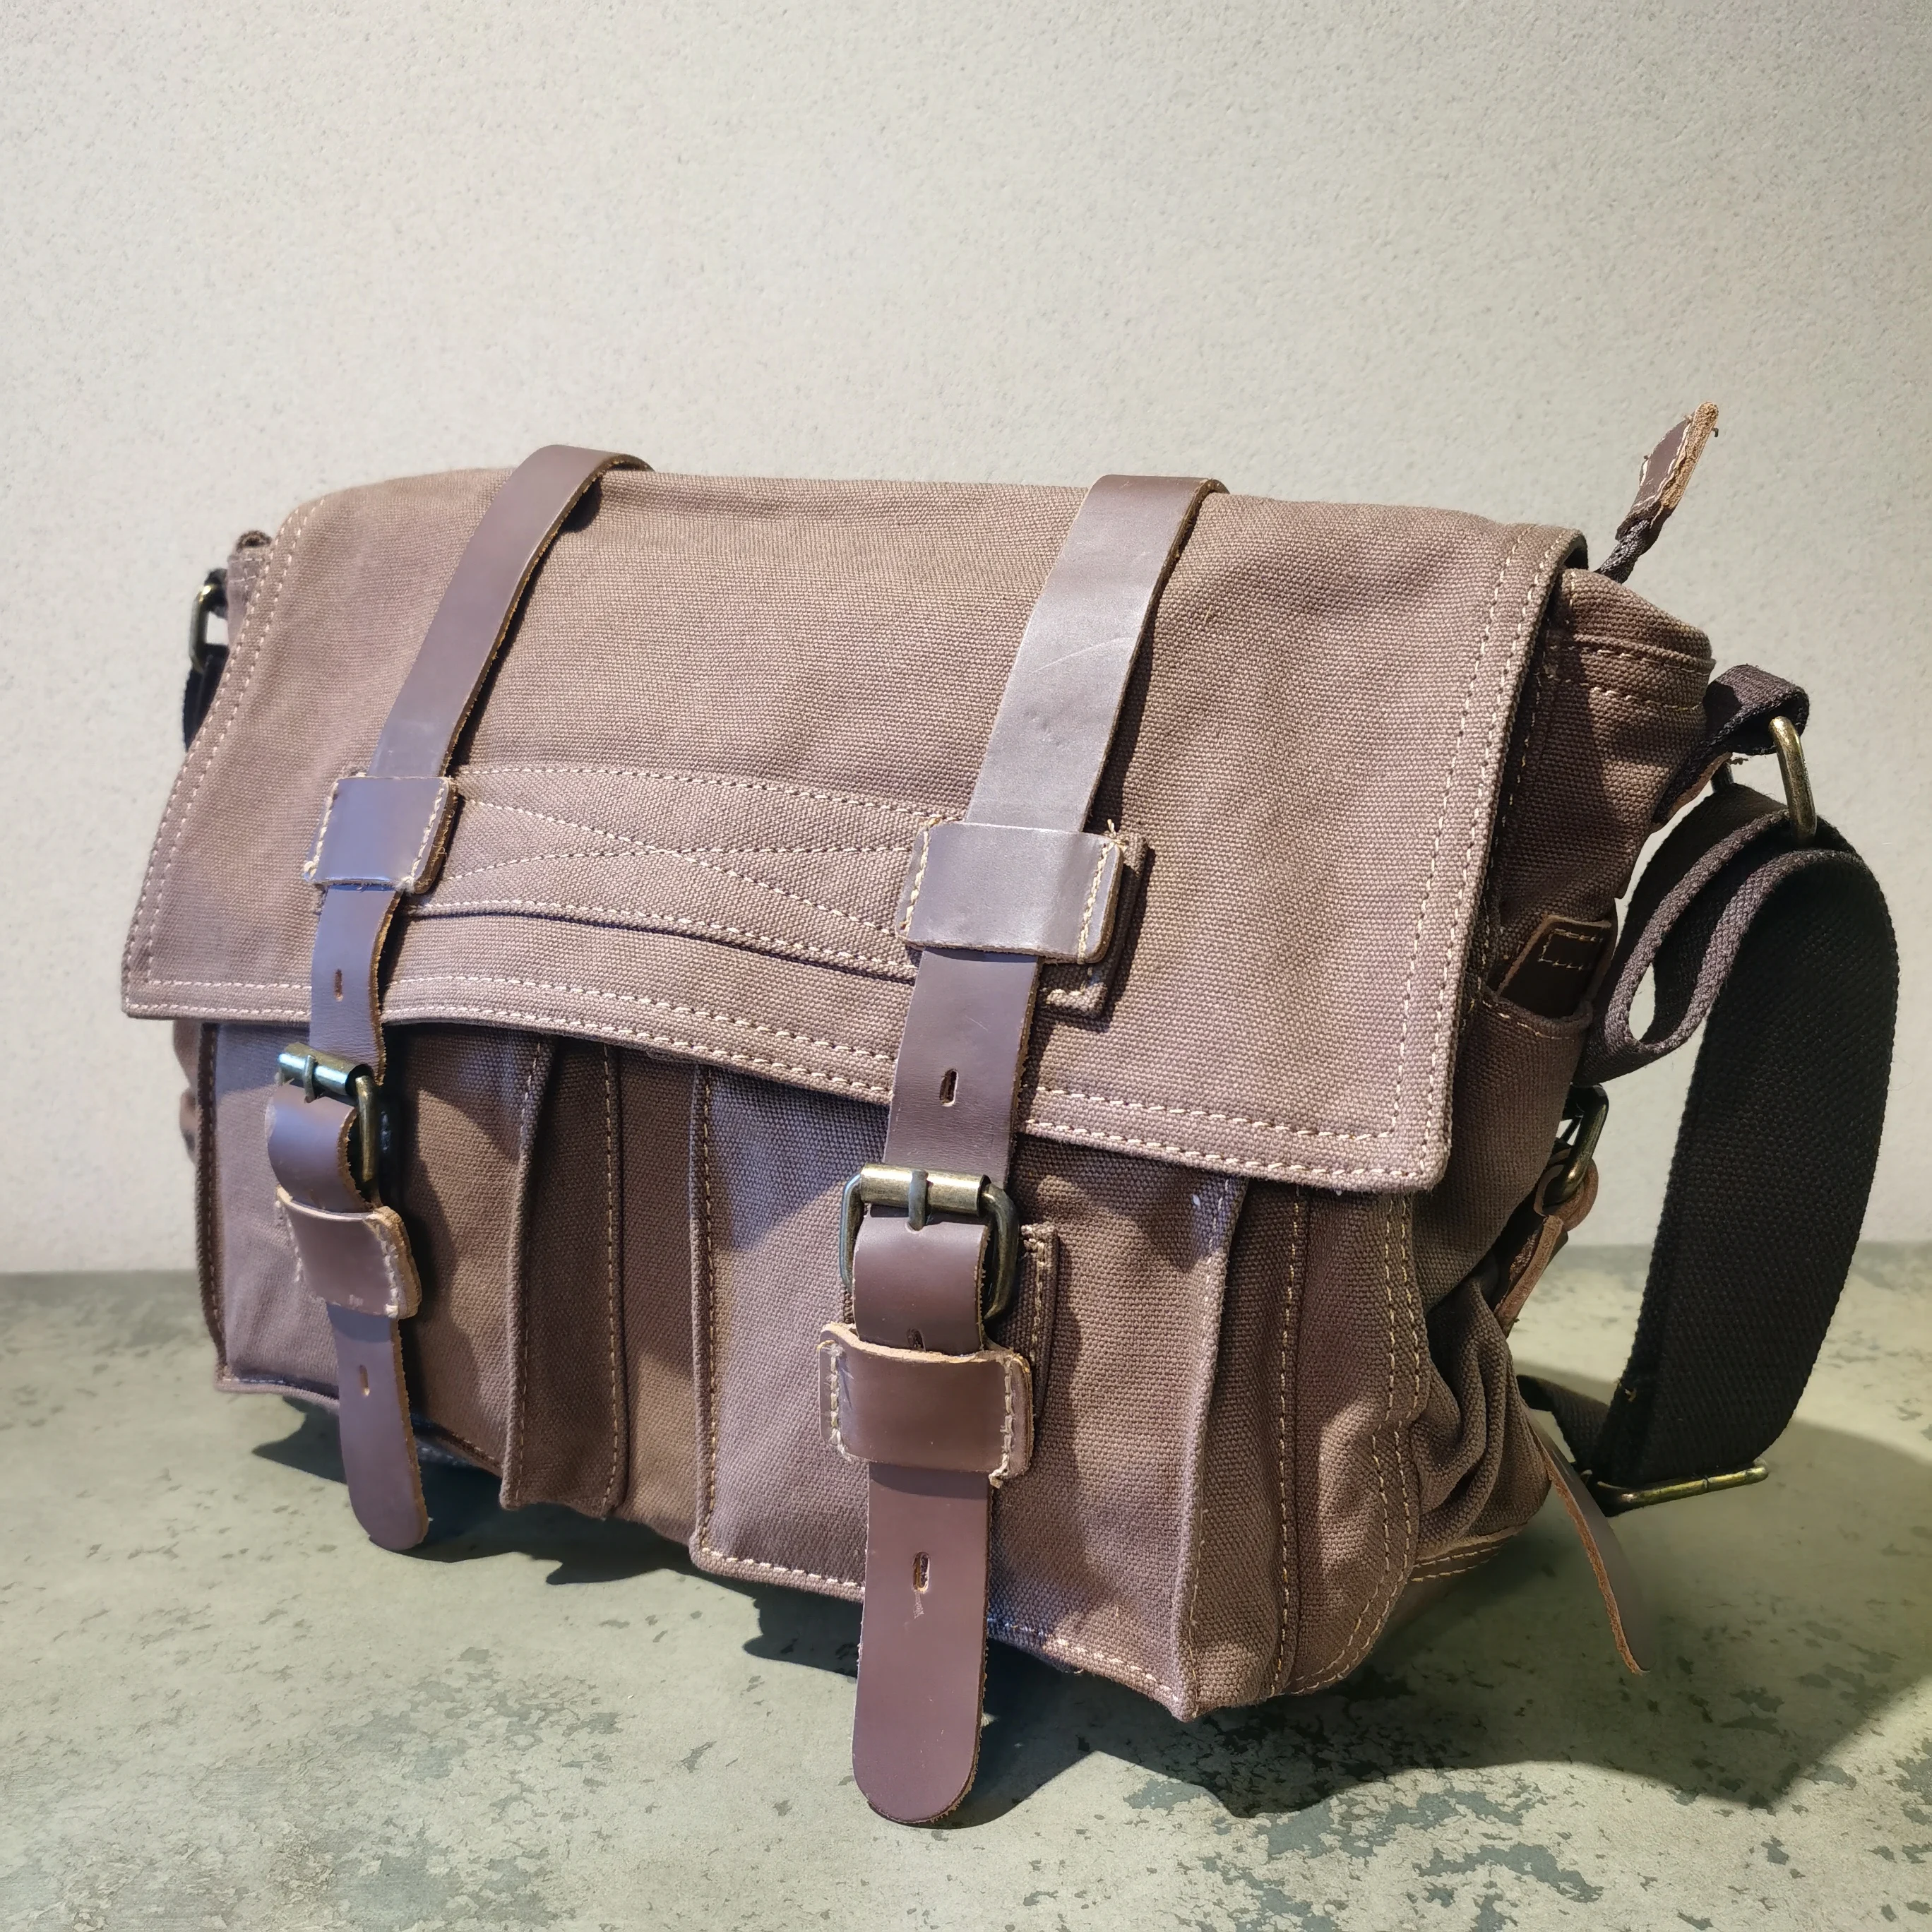 Virginland Classic Rugged Canvas Messenger Bag Army Green 